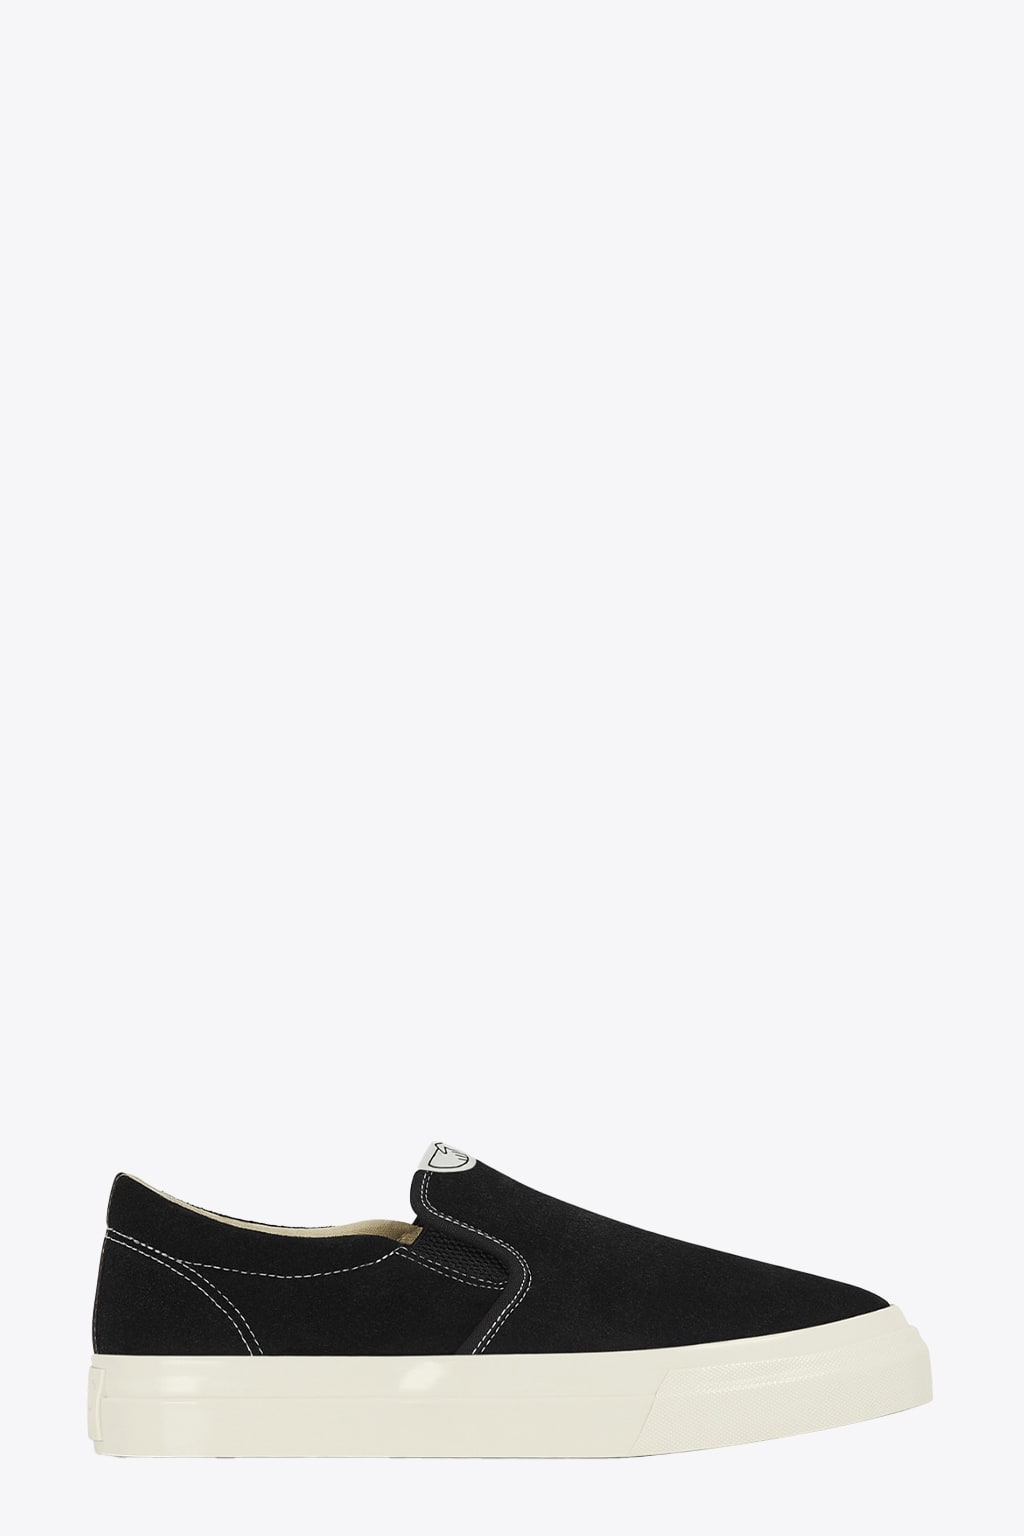 S.W.C Stepney Workers Club Lister M Suede Black suede slip-on sneaker - Lister m suede